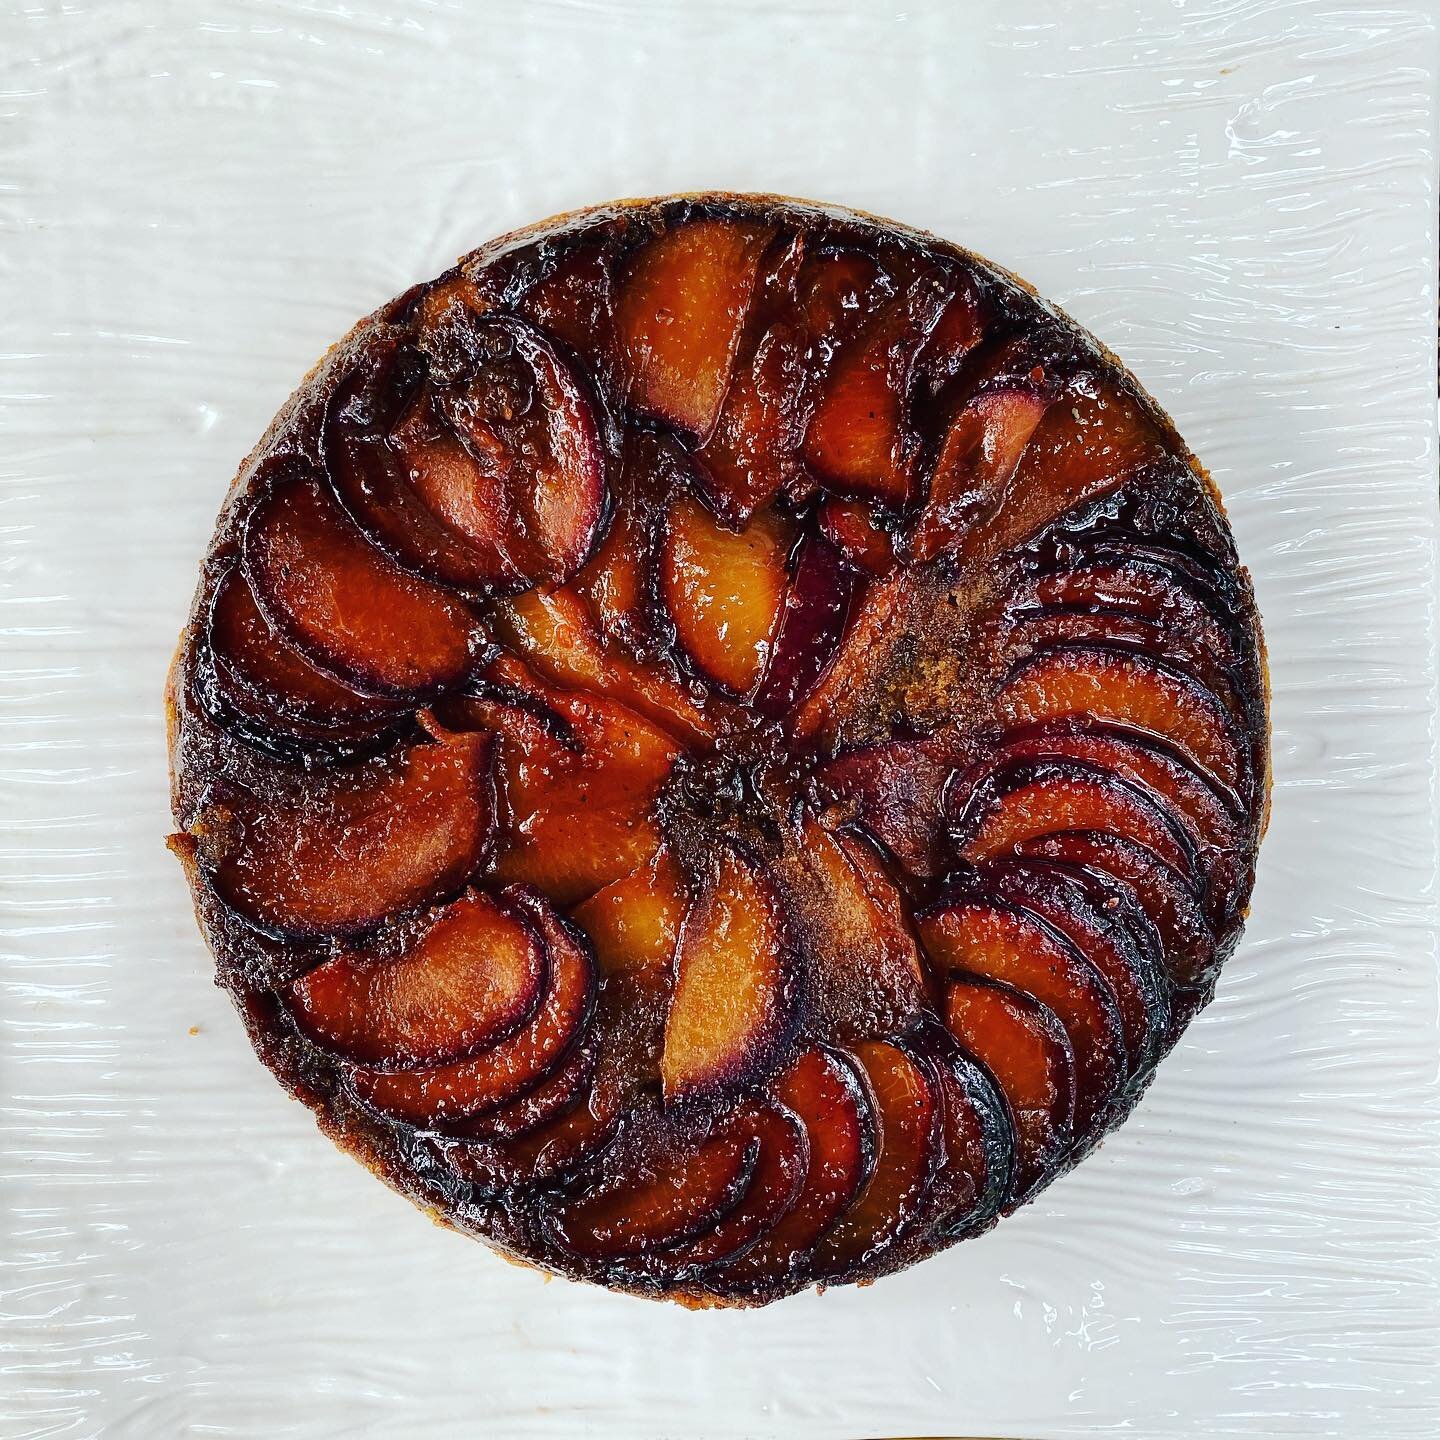 Work from home multitasking [Plum almond upside down cake with cardamom caramel]